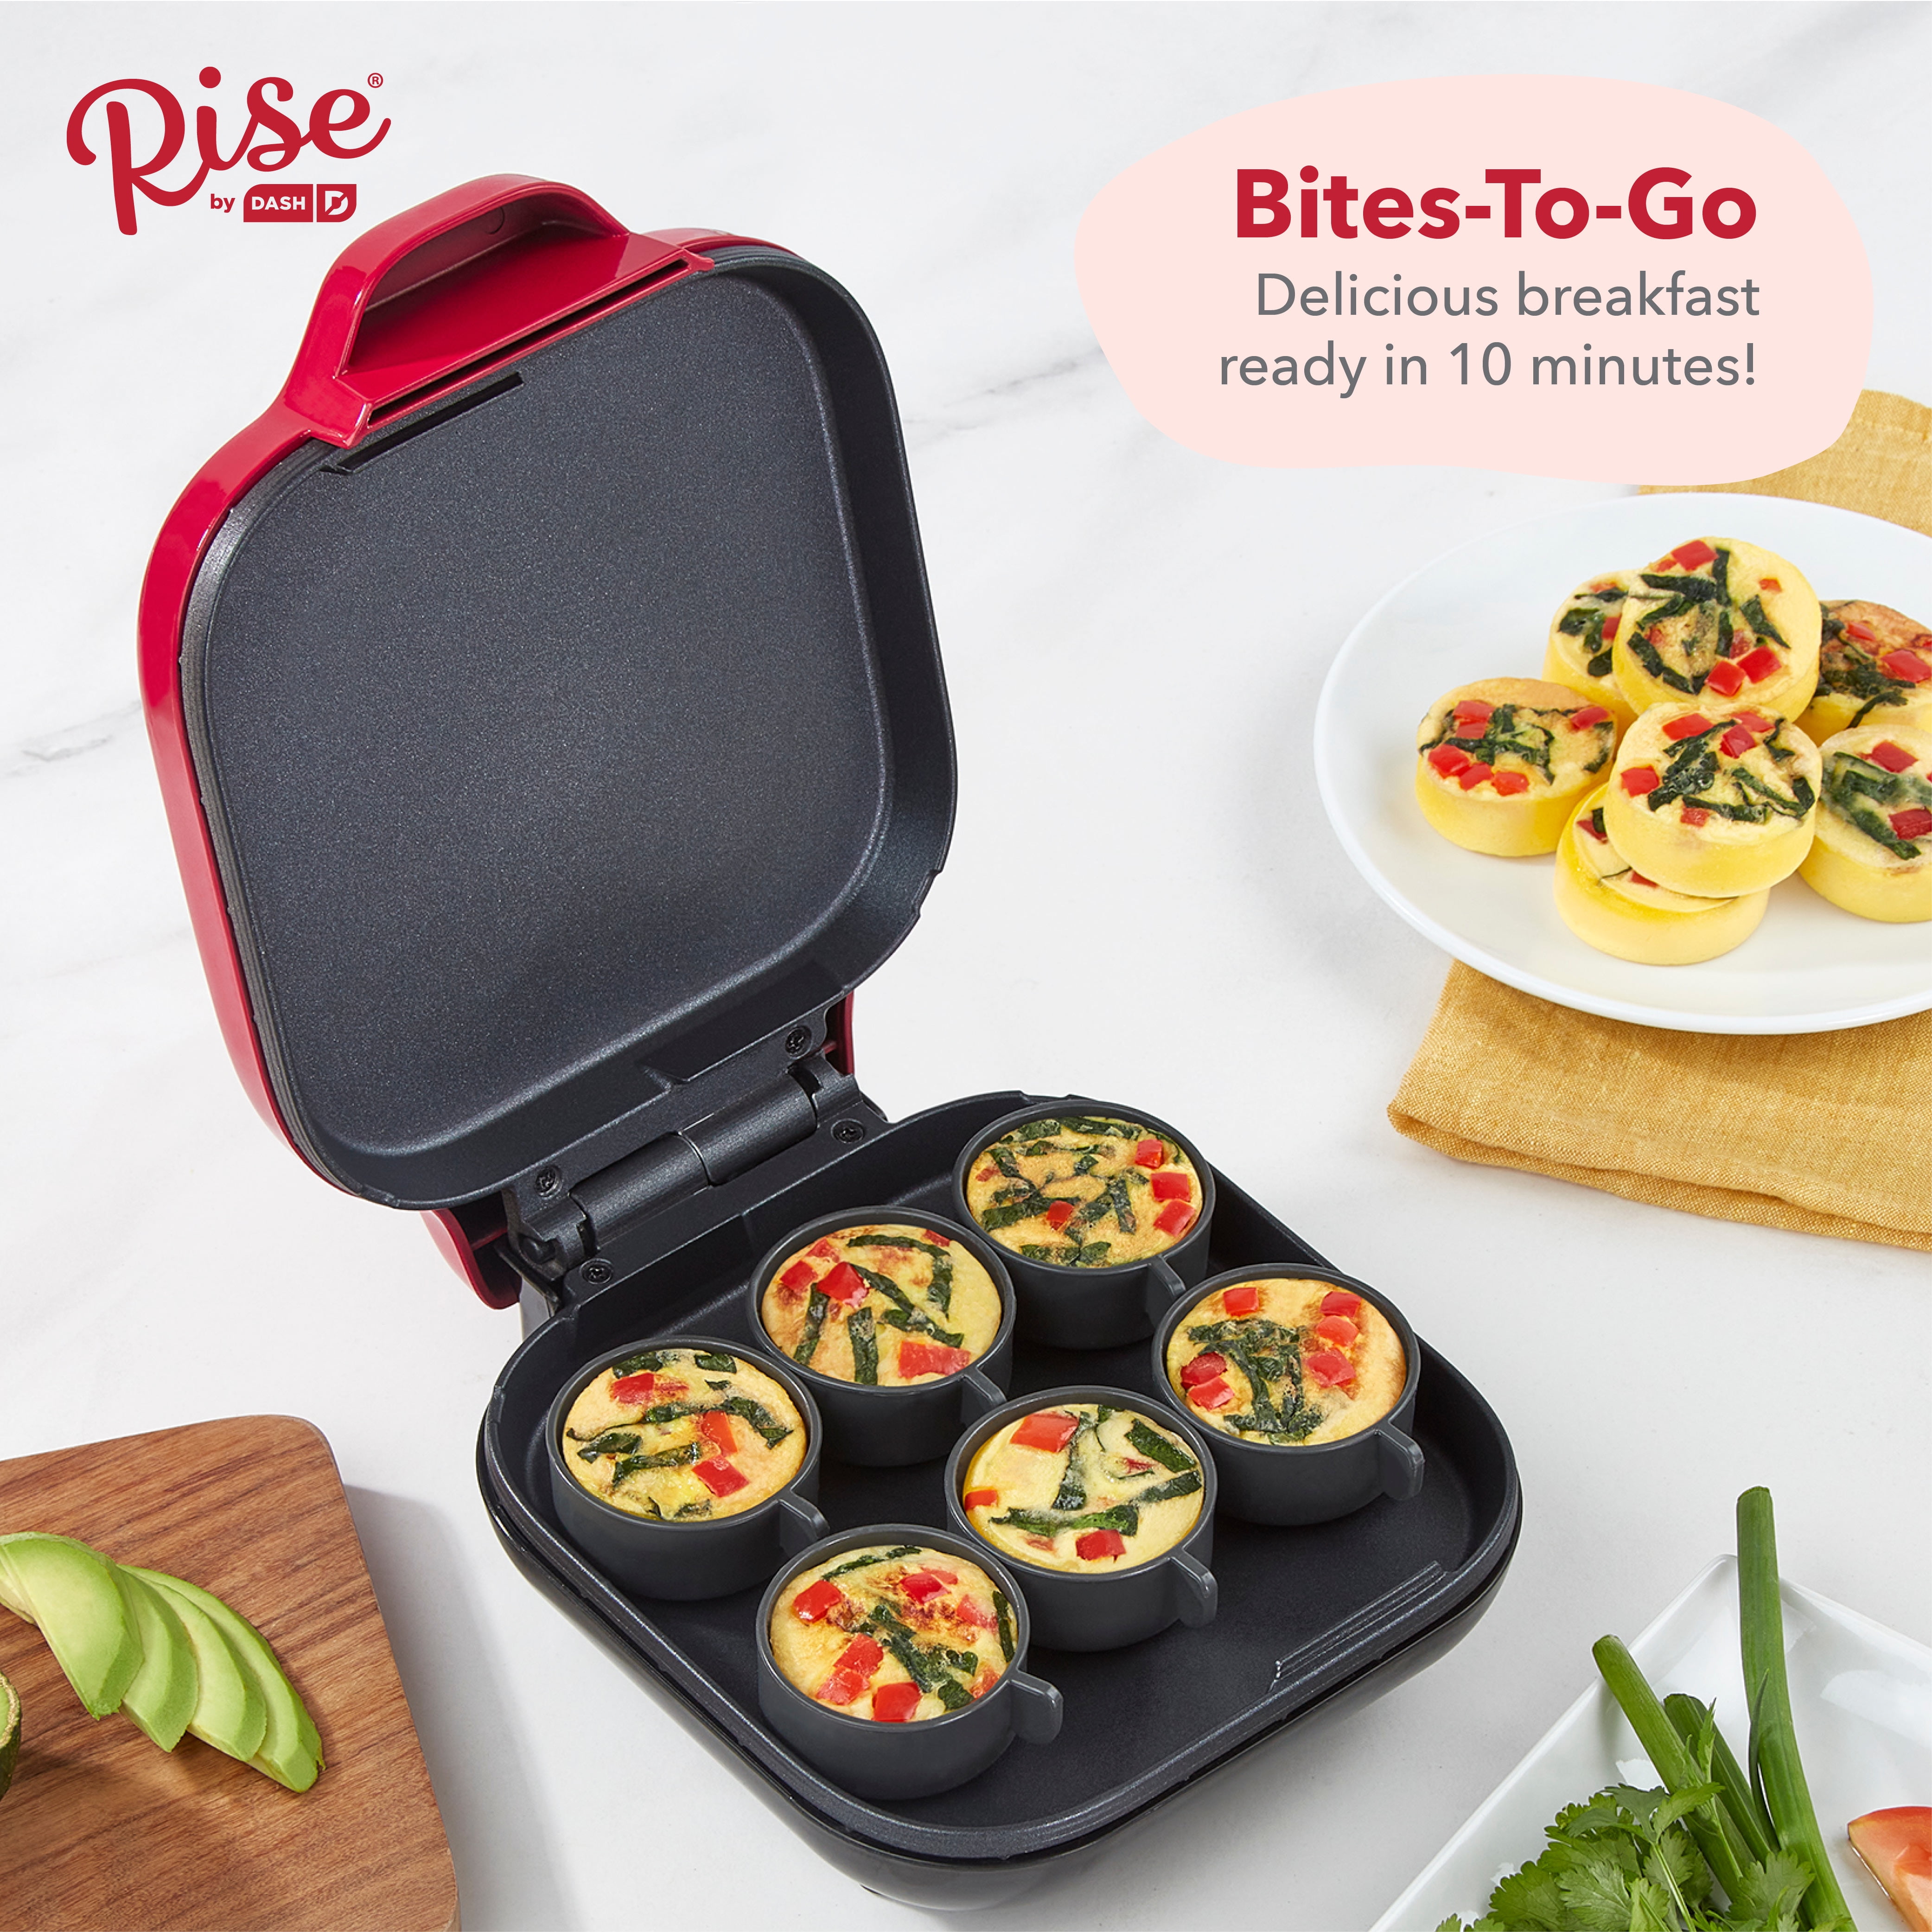 Egg-ceptional Cooking Made Easy: A Review of the DASH Egg Bite Maker 